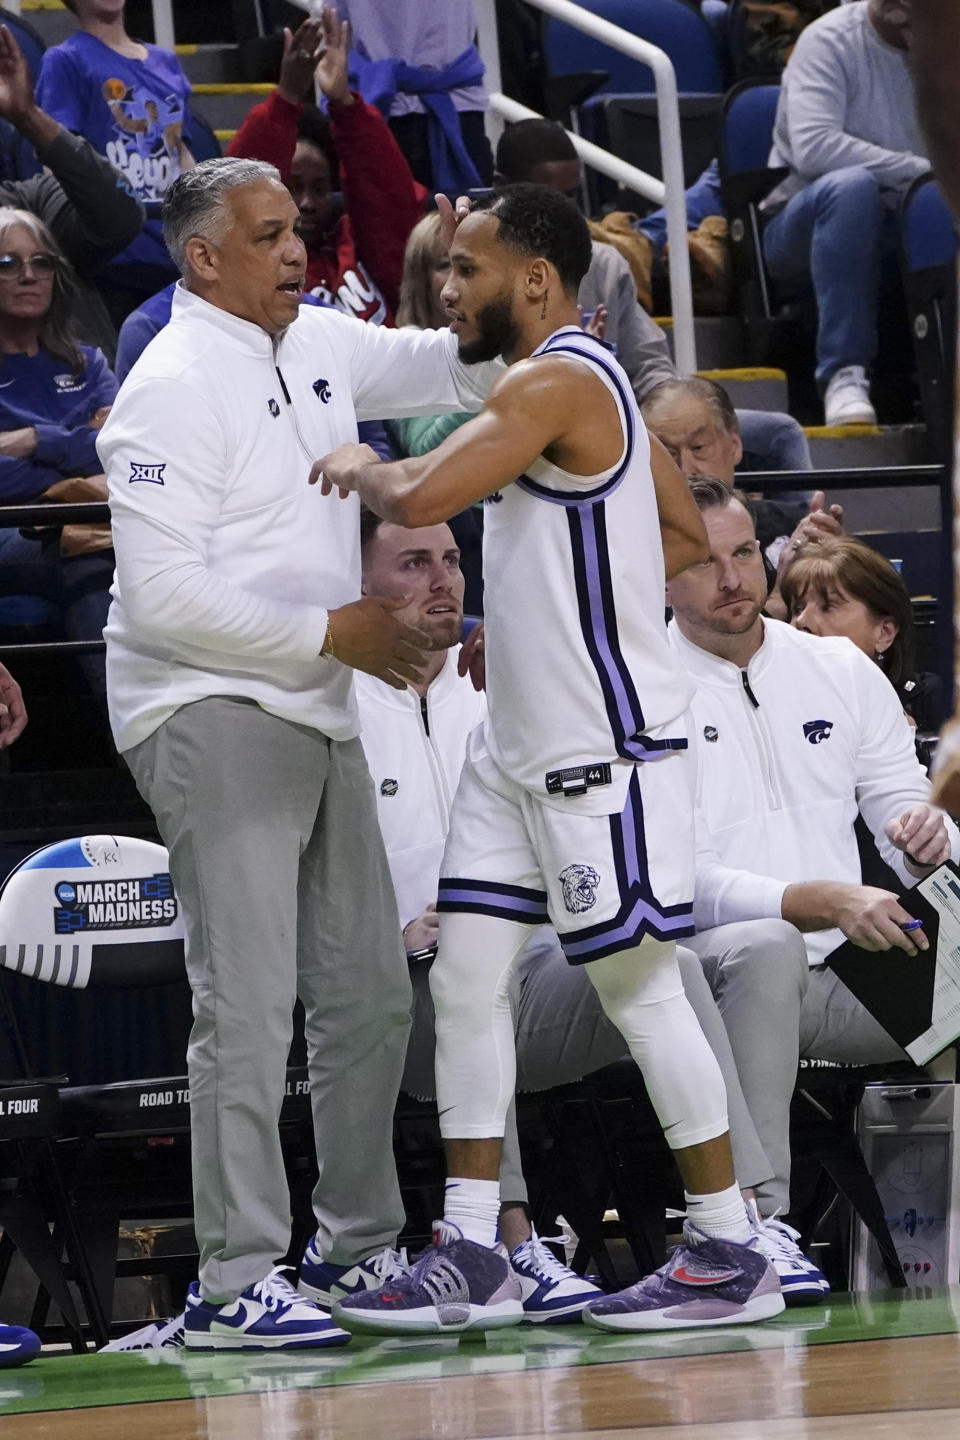 Kansas State assistant coach Kevin Sutton talks with guard Markquis Nowell (1) near the bench during the team's first-round college basketball game against Montana State in the men's NCAA Tournament on Friday, March 17, 2023, in Greensboro, N.C. The days of head coaches leaning primarily on their three assistants and maybe a director of basketball operations in running a top-tier program are gone. Sutton joined Kansas State’s staff as “director of strategies” with duties such as formulating game plans, scouting and film review. (AP Photo/John Bazemore)